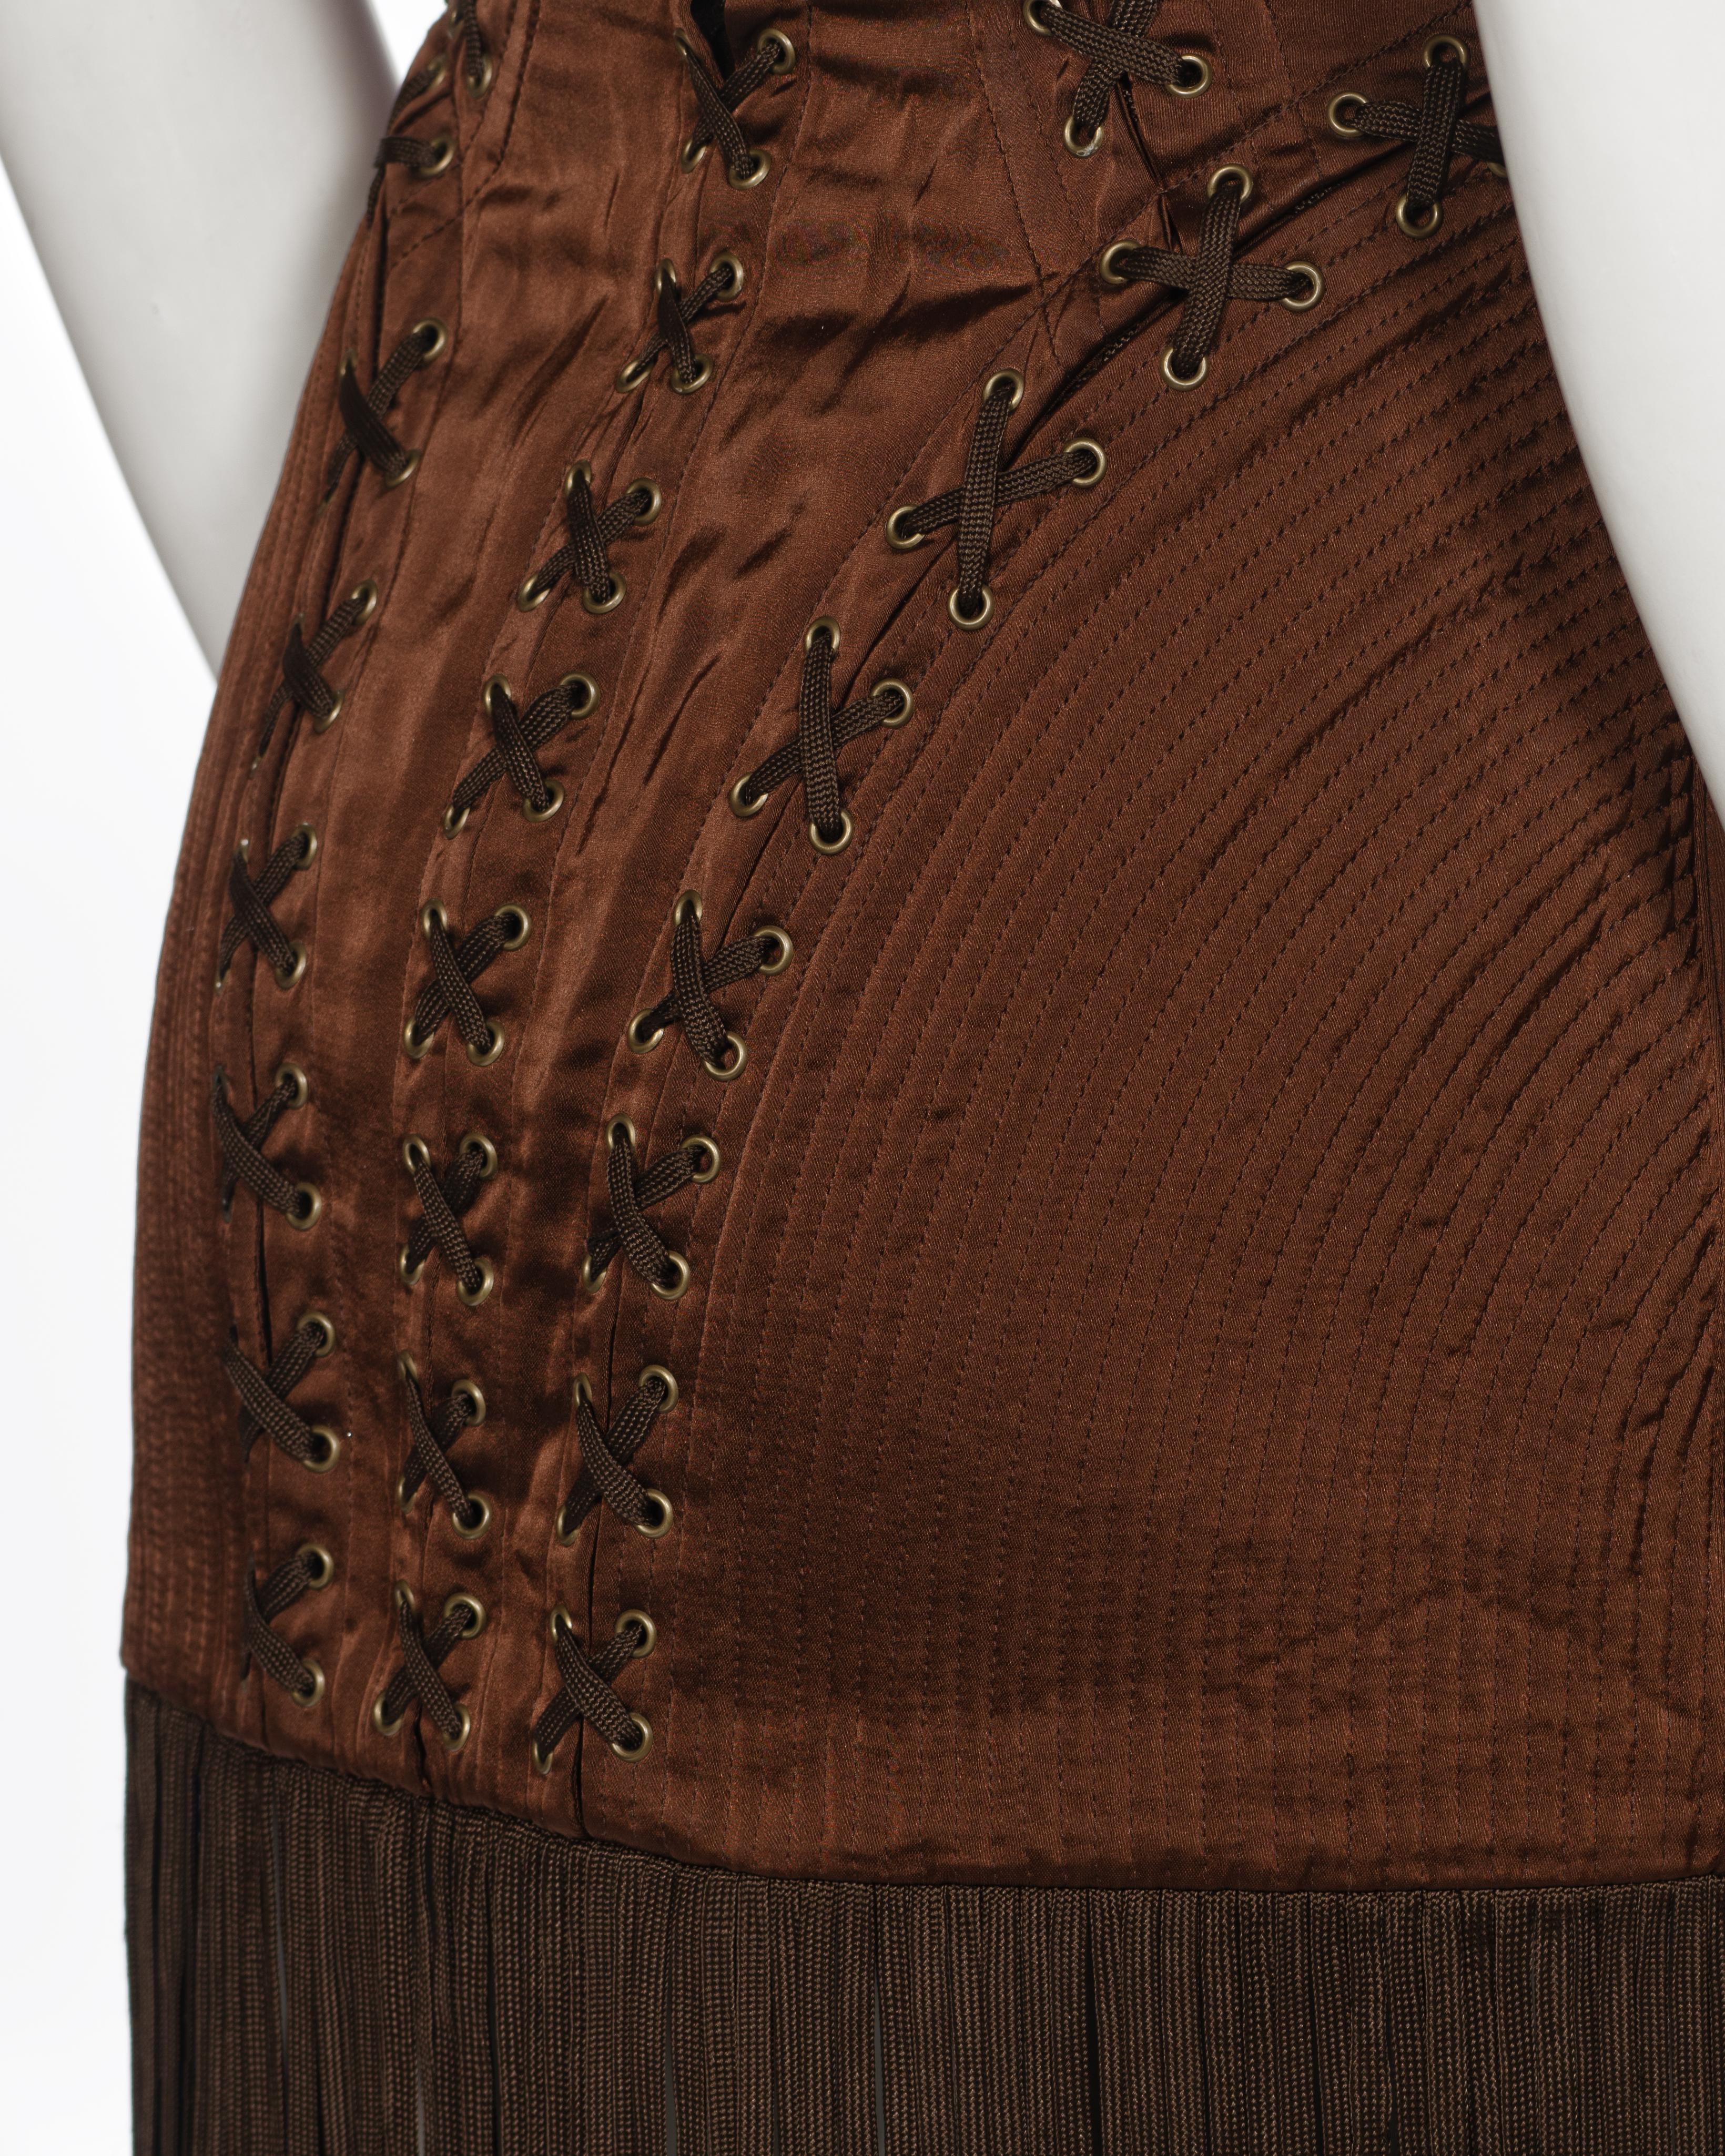 Jean Paul Gaultier Brown Corset Dress with Cone Bra and Fringed Hem, fw 1990 For Sale 9